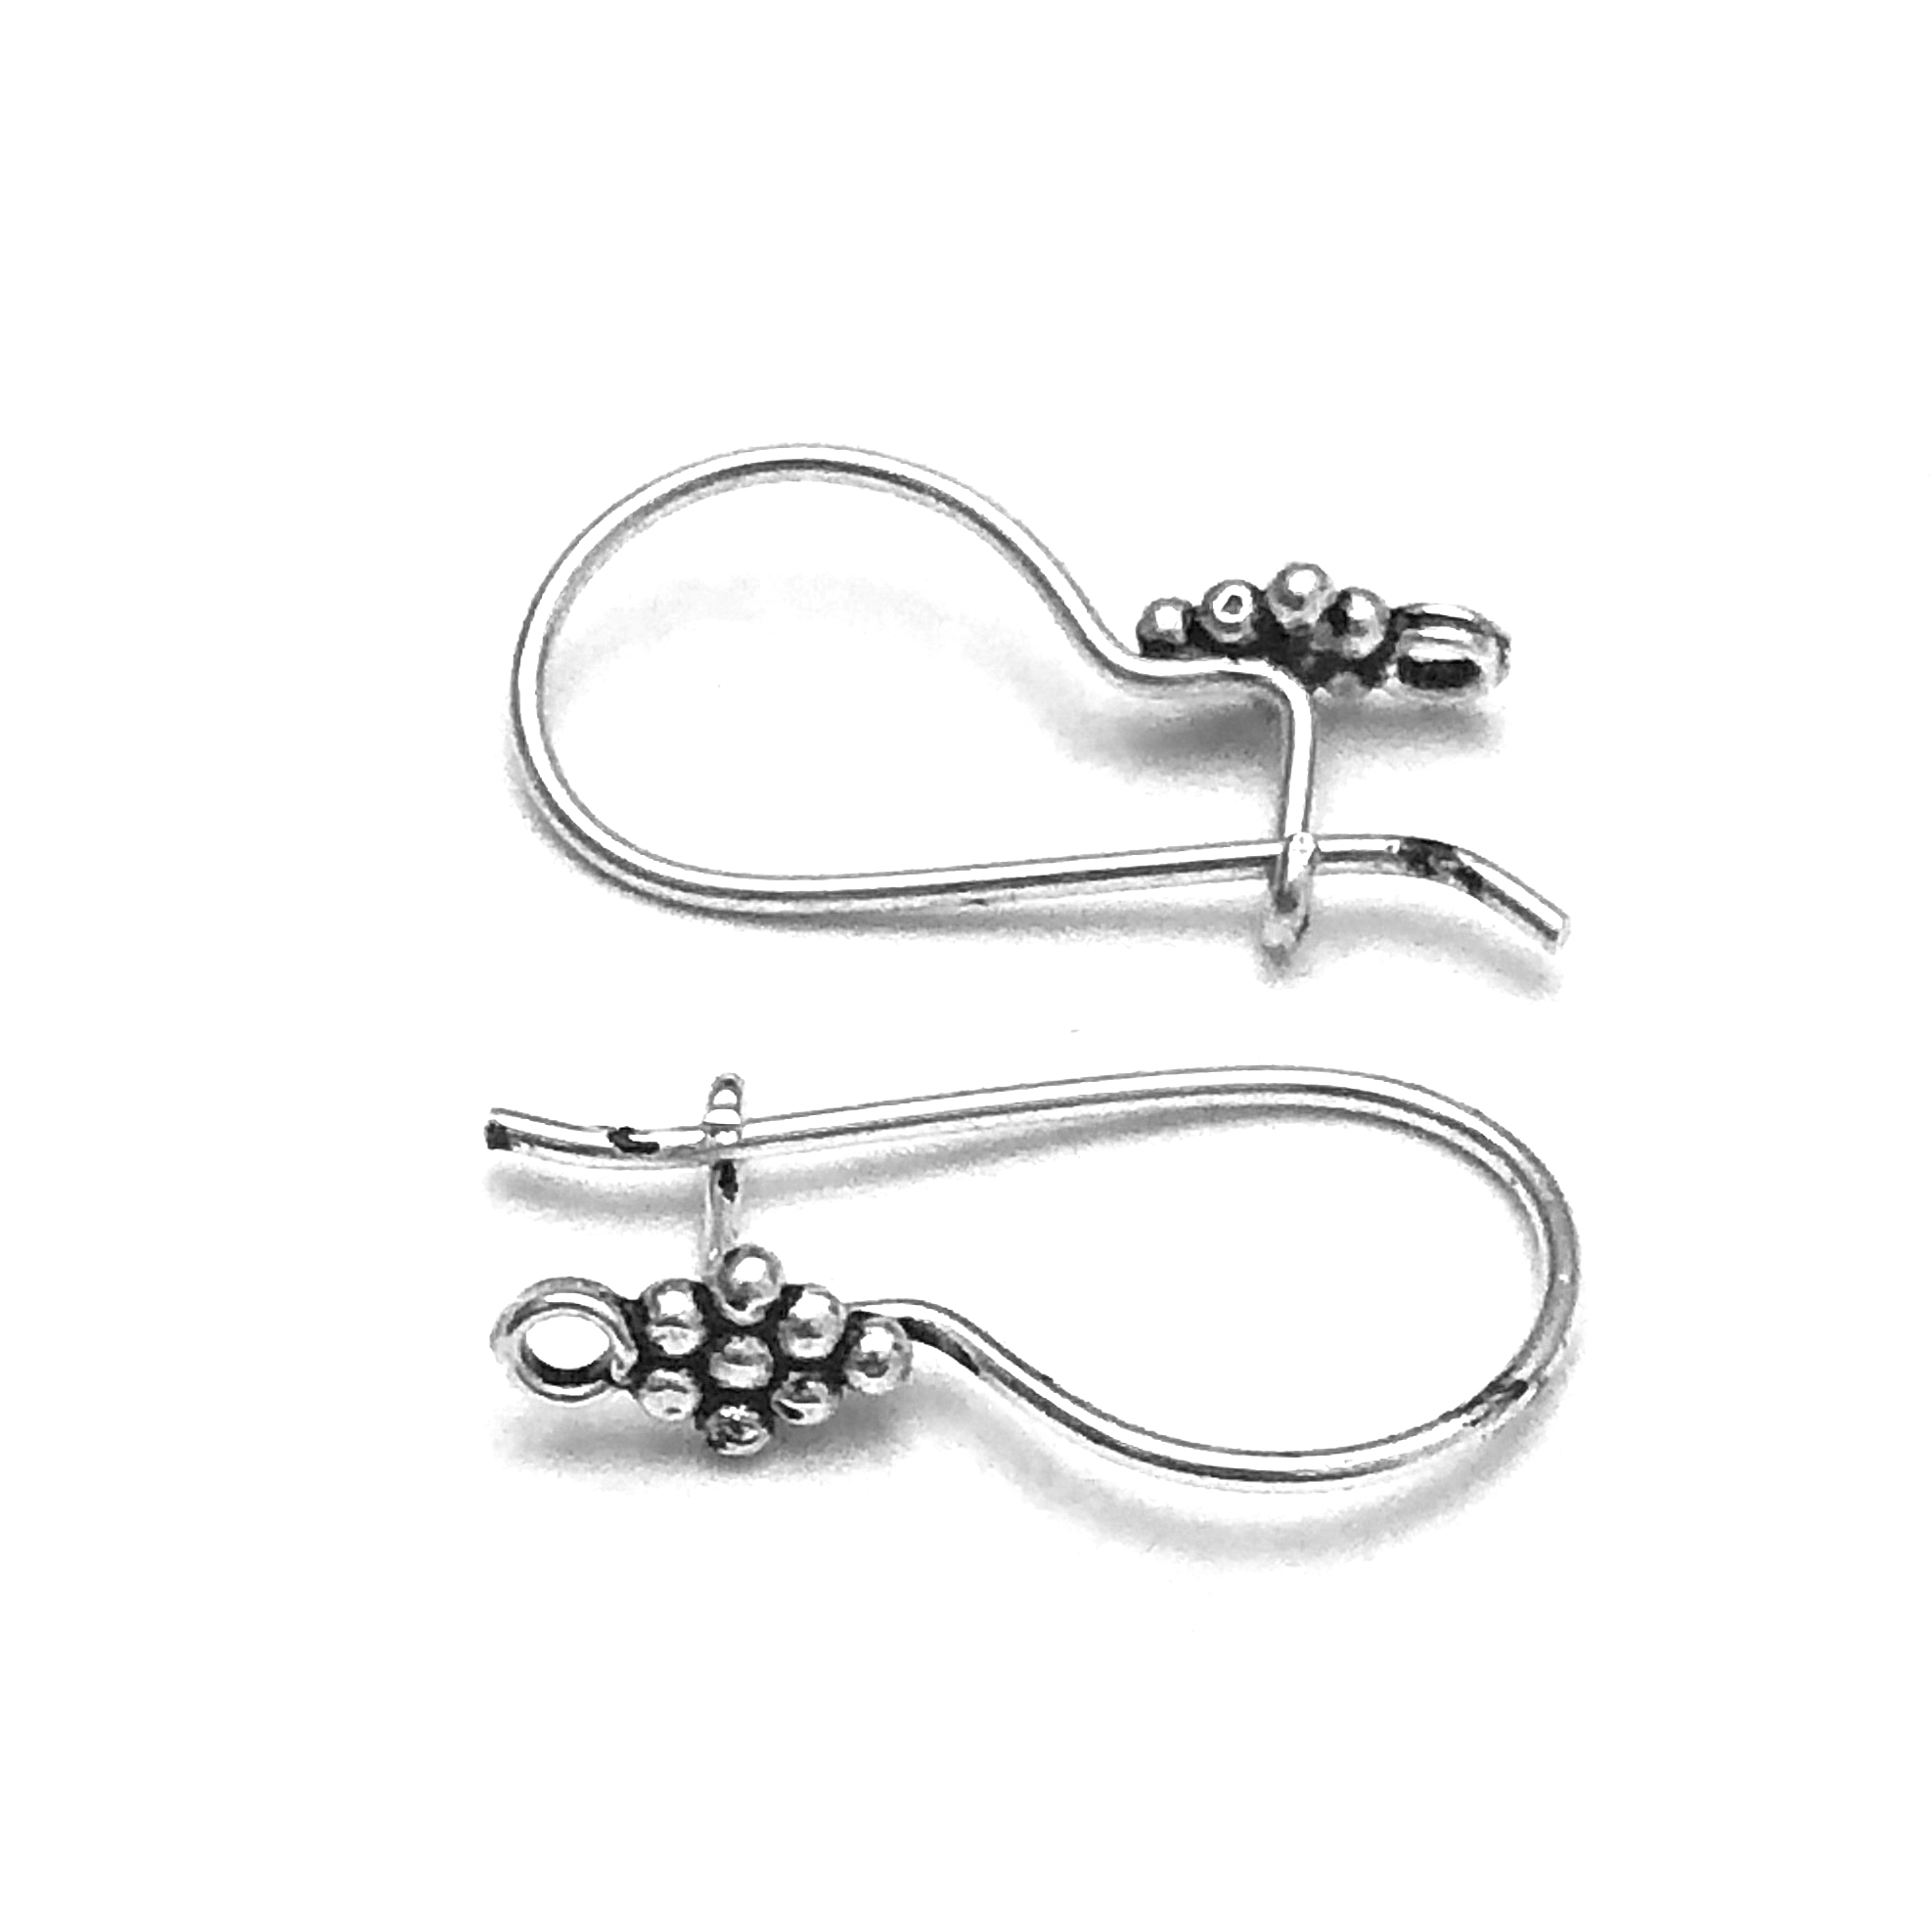 Pair of Sterling Silver Hook Blank Earrings 2 cm 1.3 gram ID # 2955 - Click Image to Close